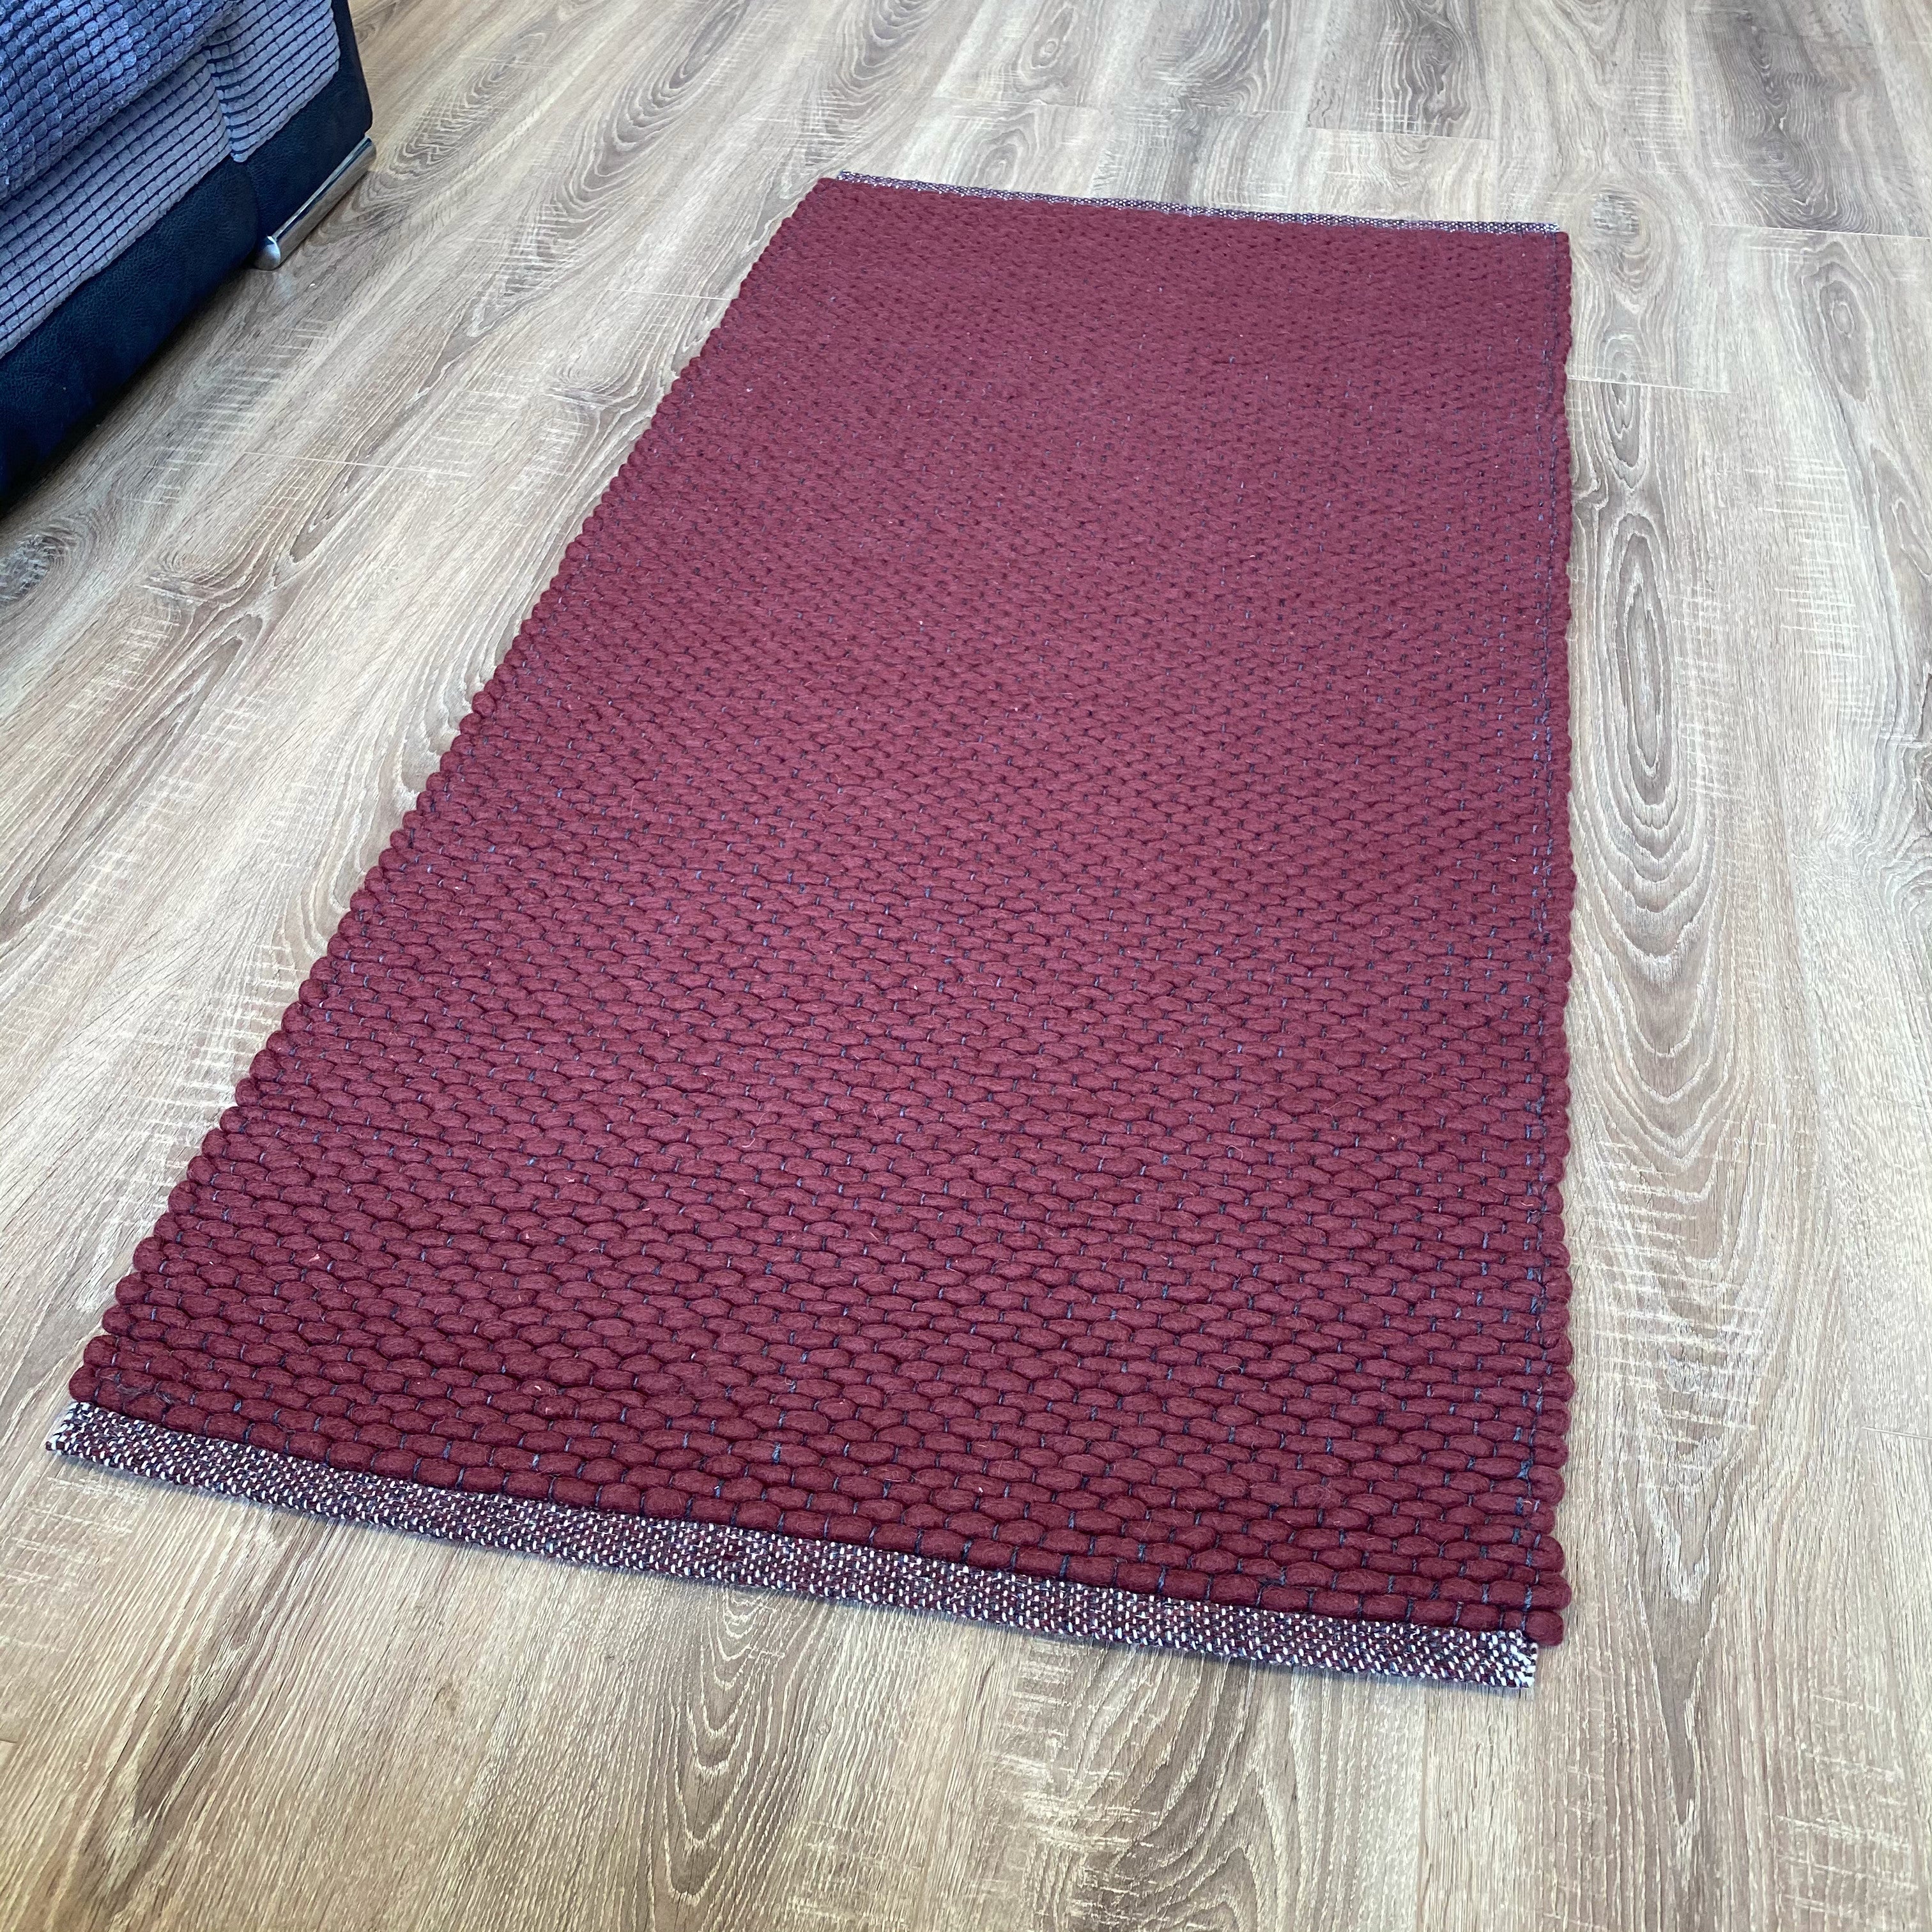 An image of Hermes Hand Woven Wool Rug Thick Loom 160 x 230cm / Concerto